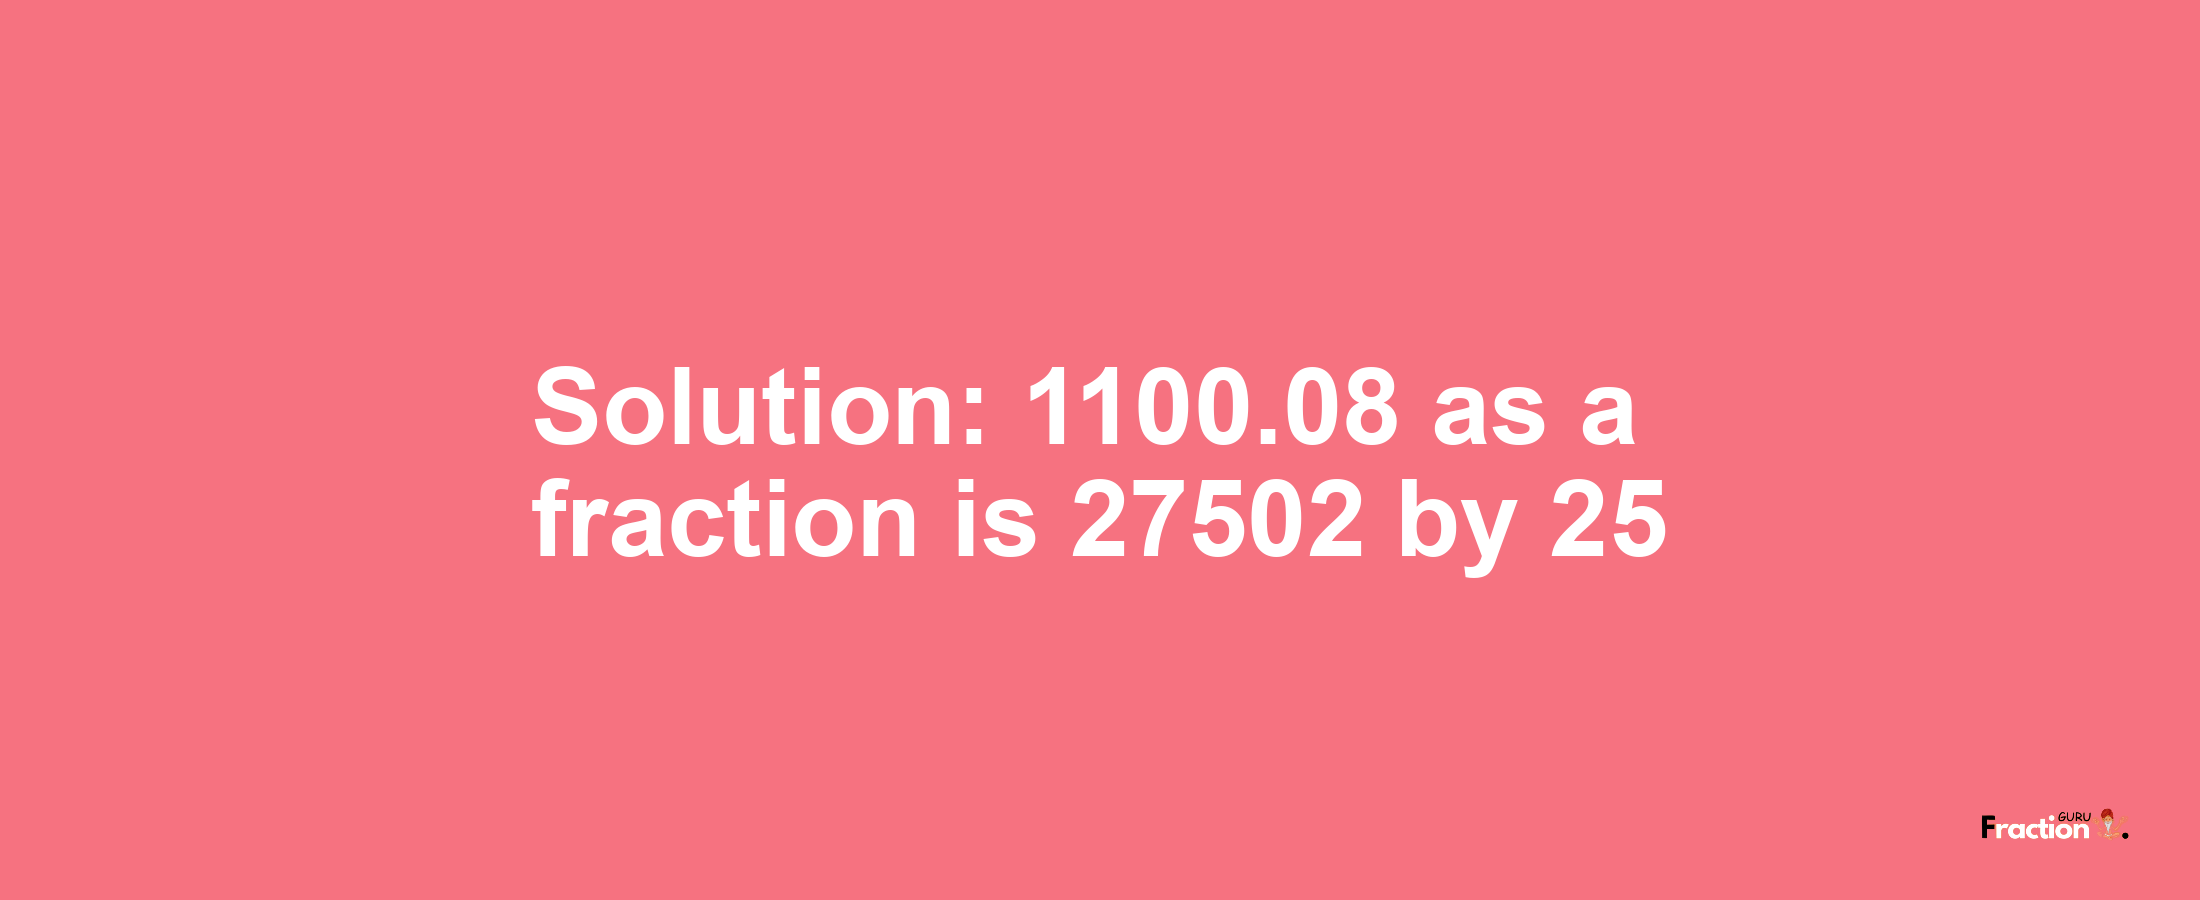 Solution:1100.08 as a fraction is 27502/25